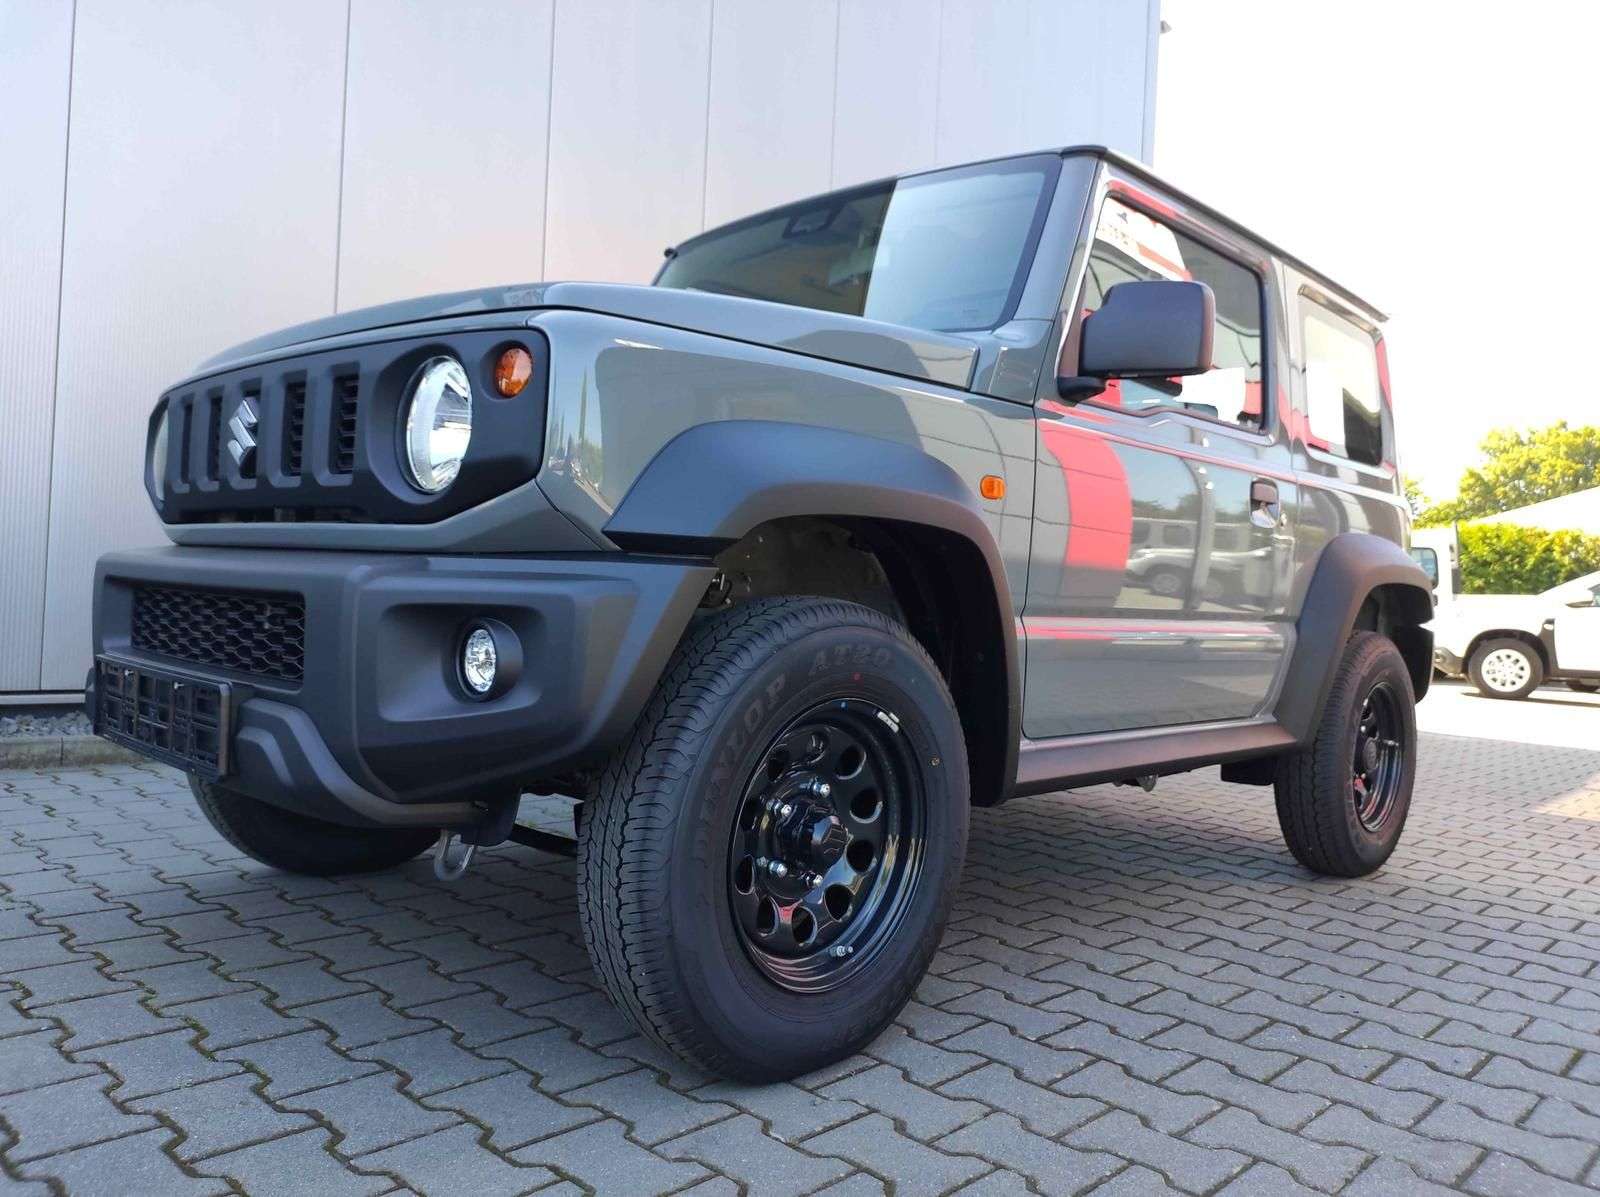 Suzuki Jimny Off-Road/Pick-up in Grey pre-registered in Polch for € 27,490.-